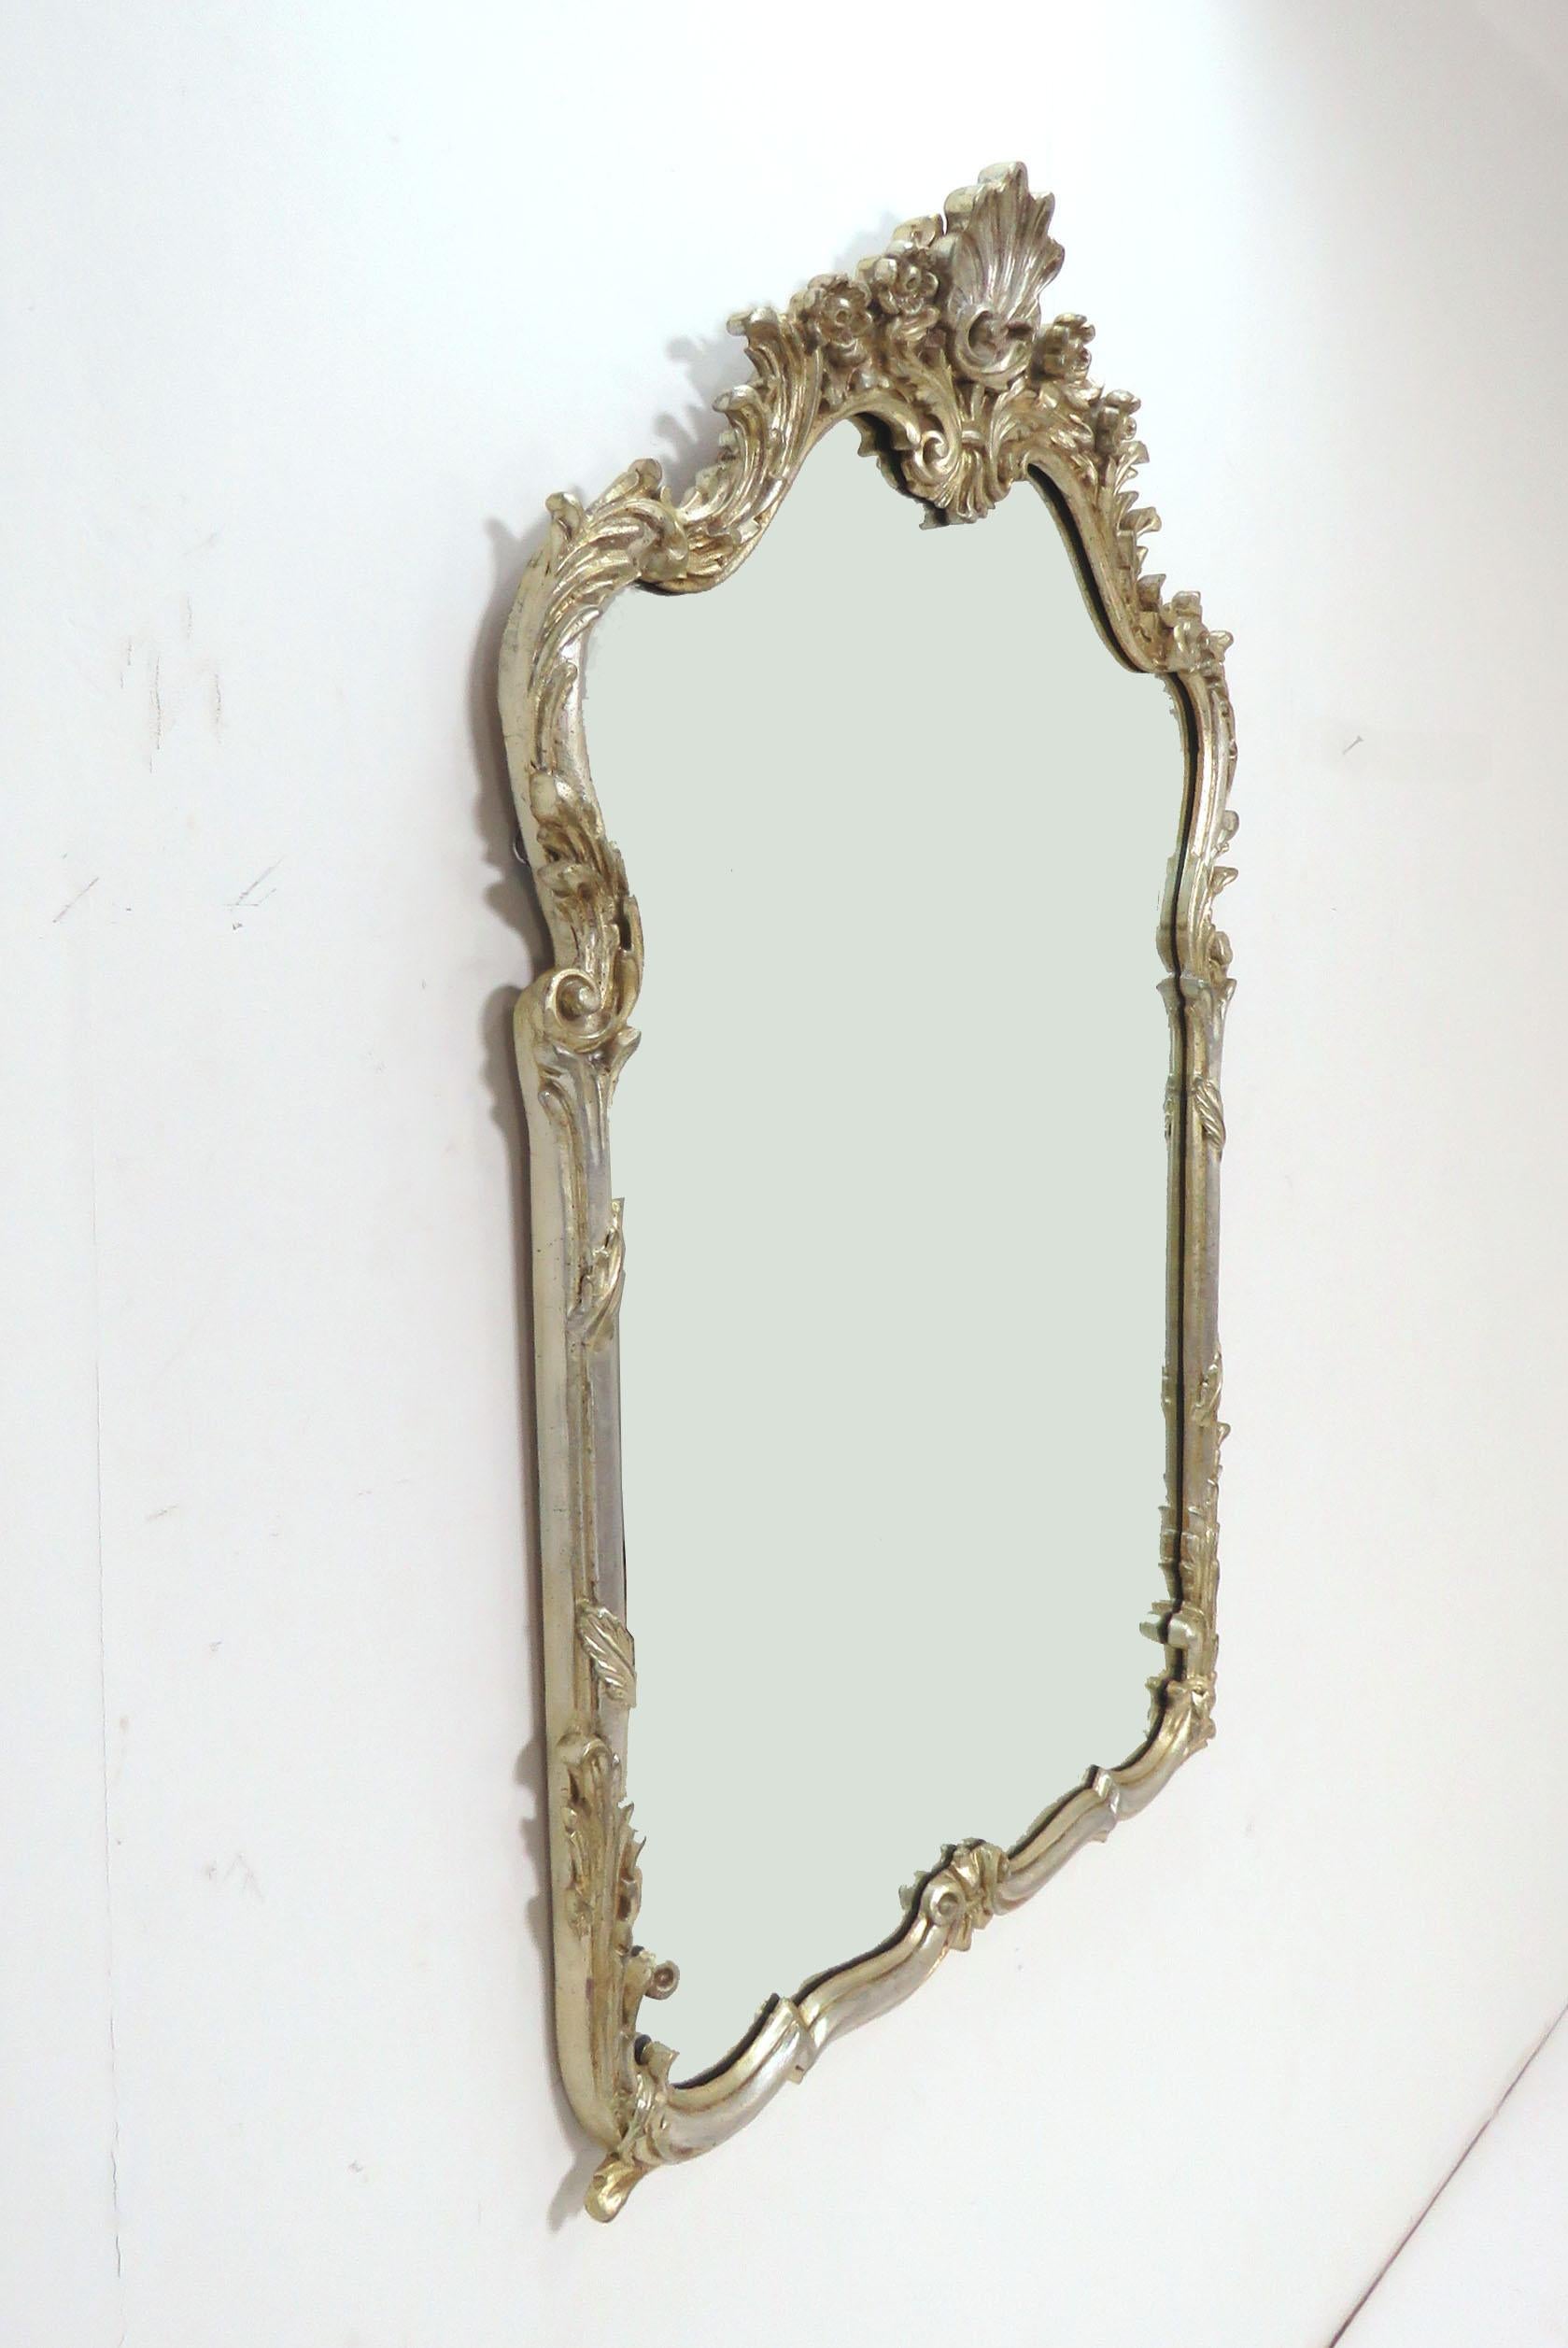 Wall mirror by La Barge in silver gilt with gold highlights, ornately carved. Made in Italy, circa 1960s.